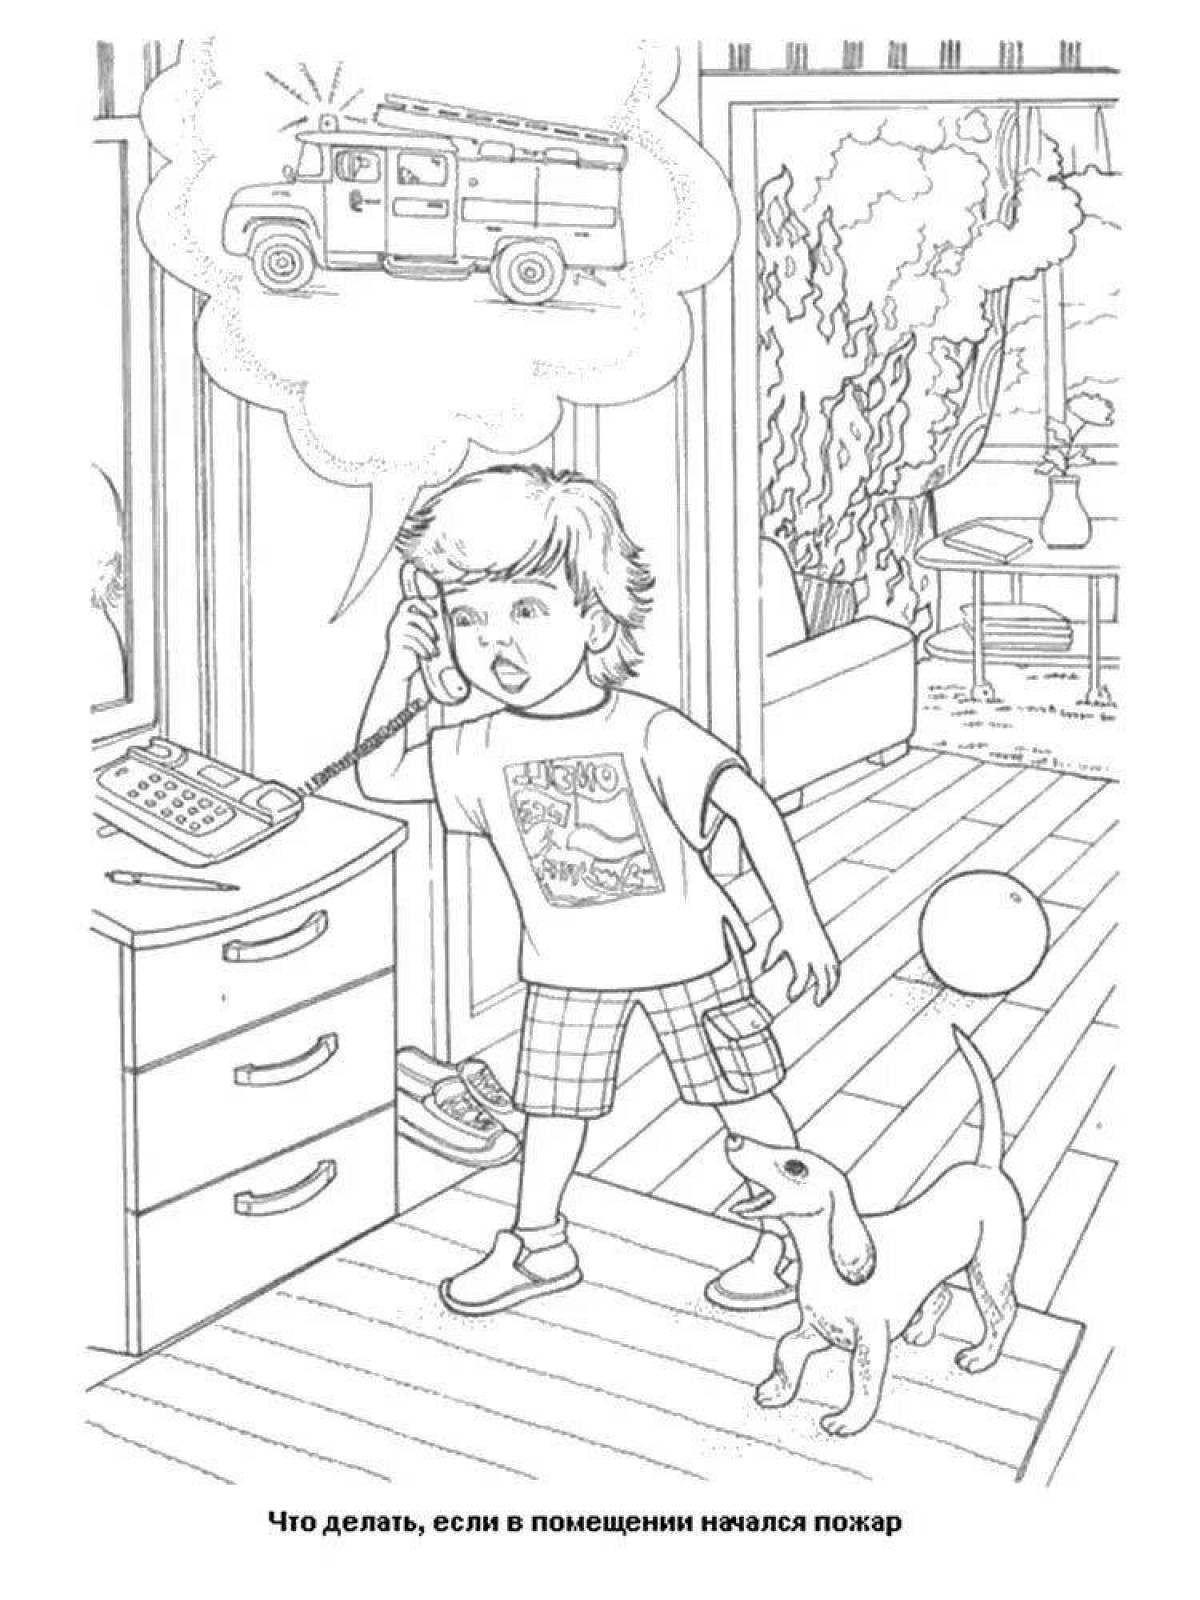 Creative Security Coloring Page